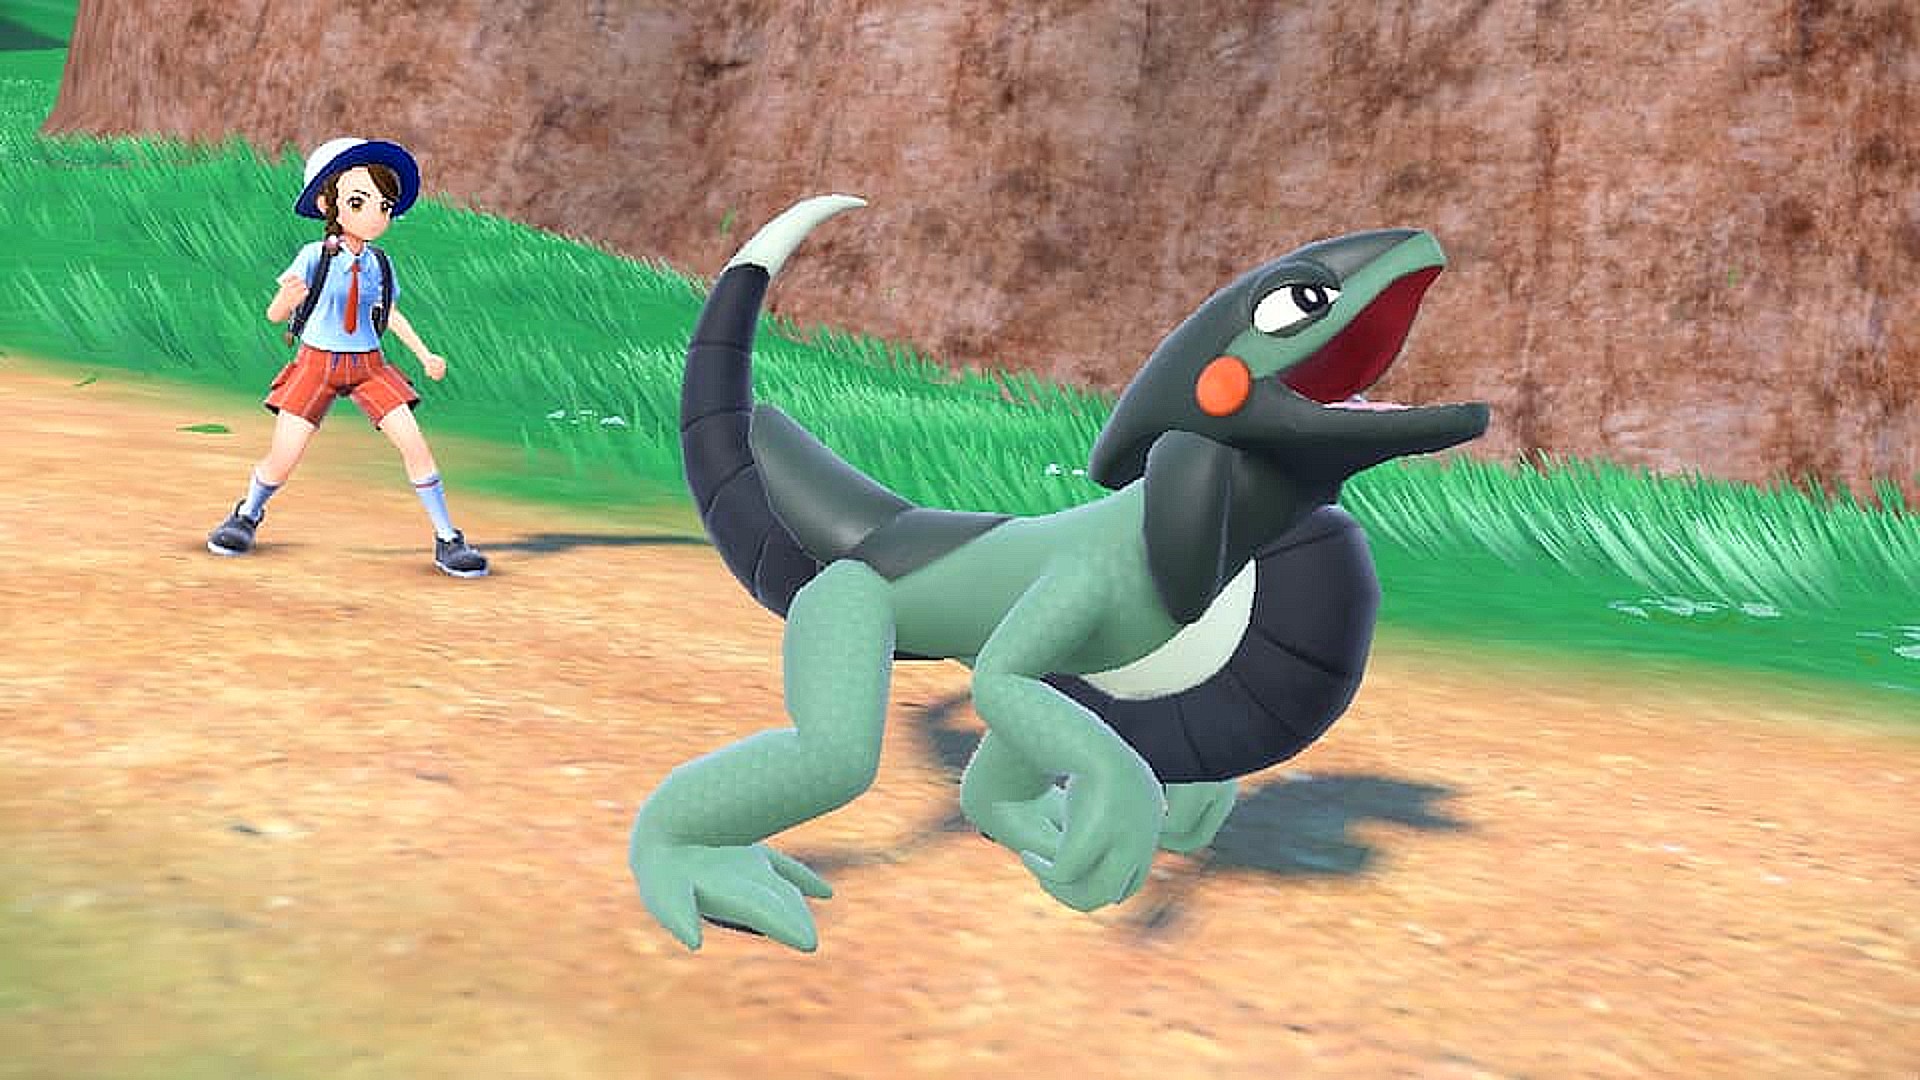 Pokemon Scarlet and Violet new pokemon: Cyclizar, a green and black lizard Pokemon, roars with its trainer in the background